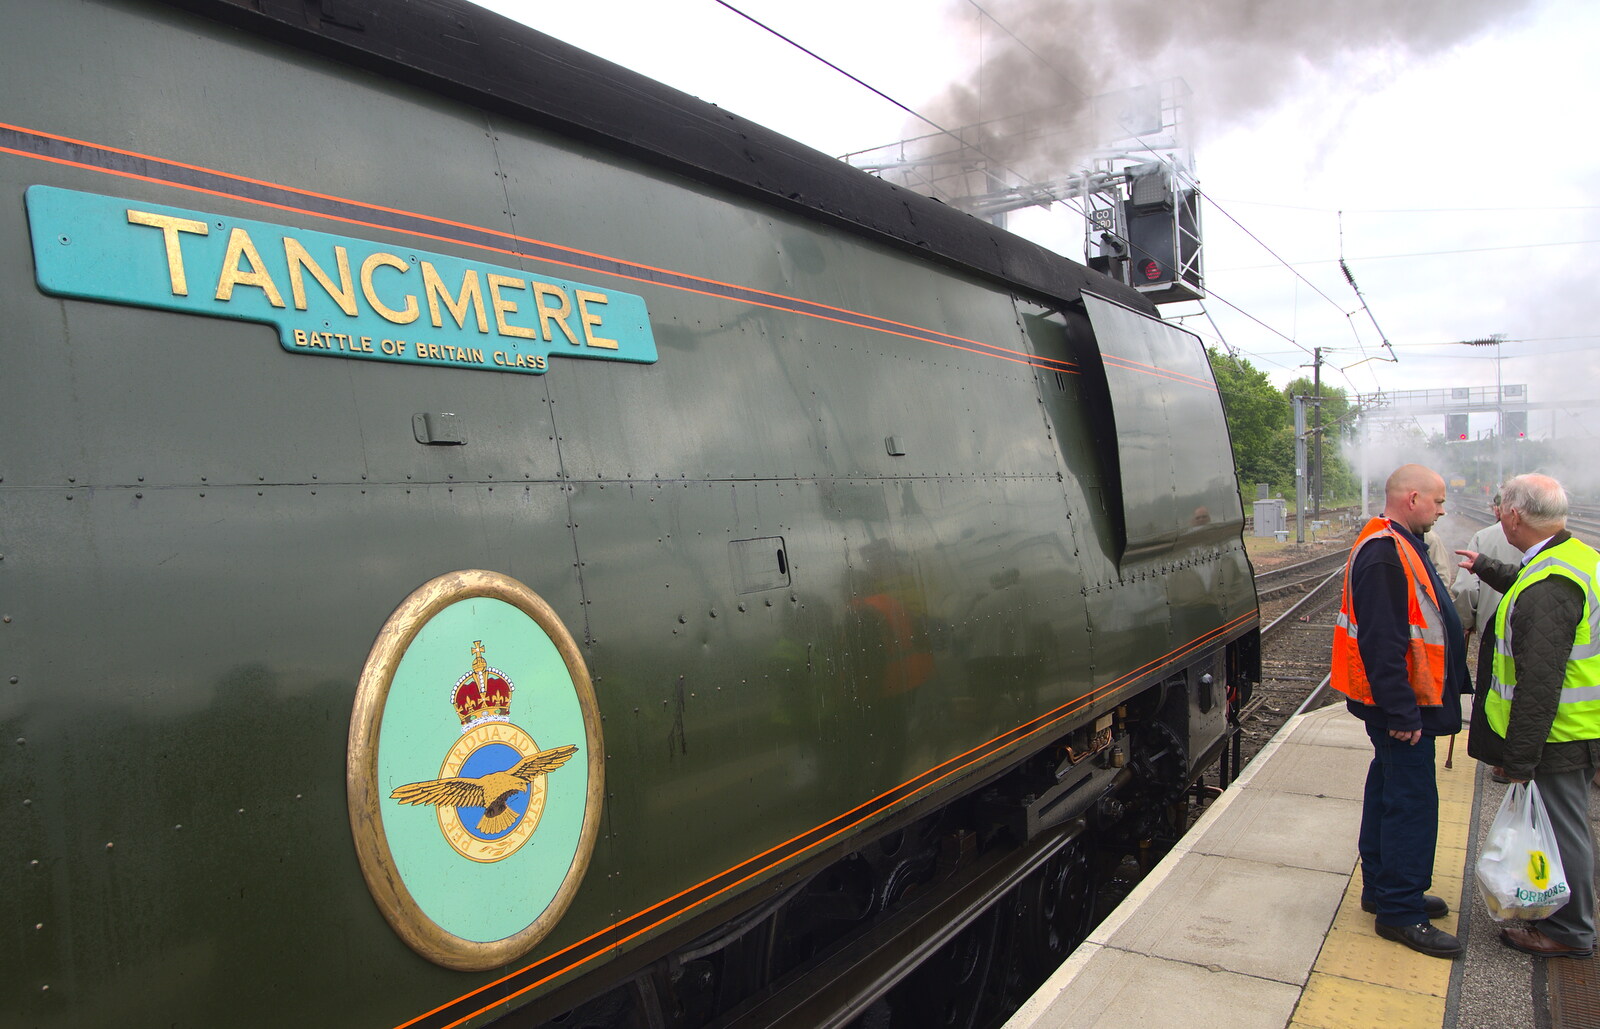 Tangmere's RAF crest from Tangmere at Norwich Station, Norwich, Norfolk - 25th May 2013